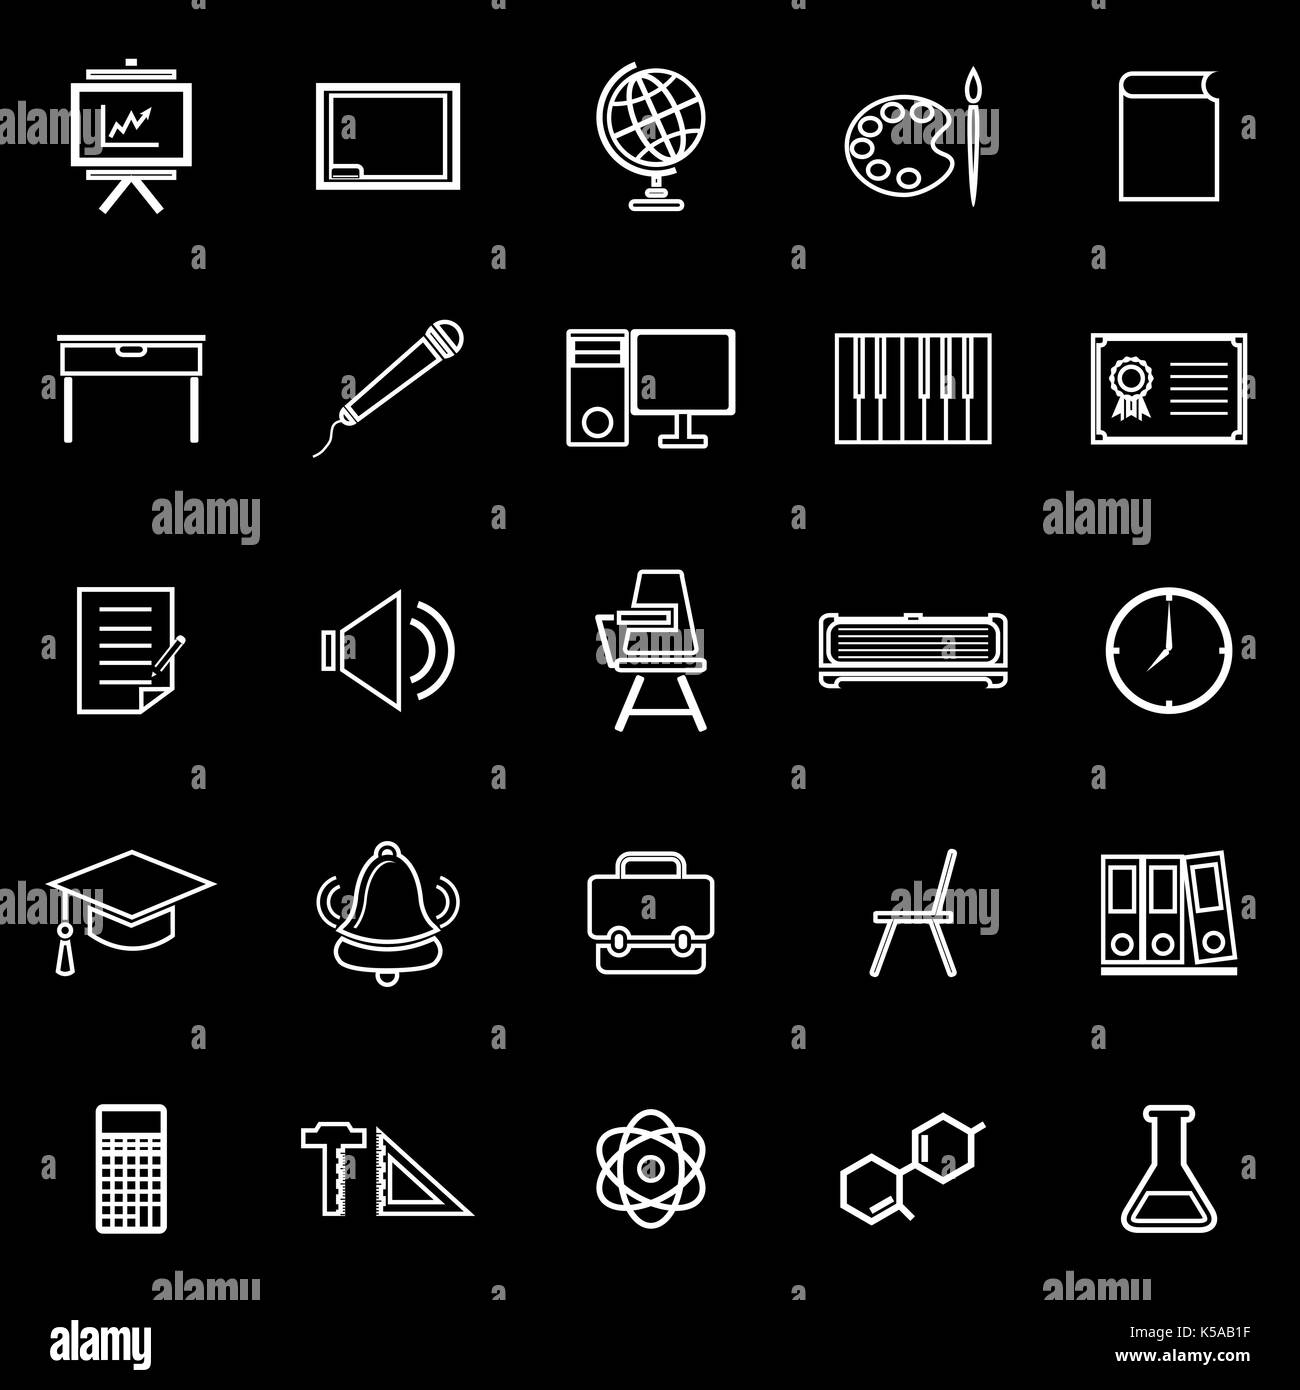 Classroom line icons on black background, stock vector Stock Vector